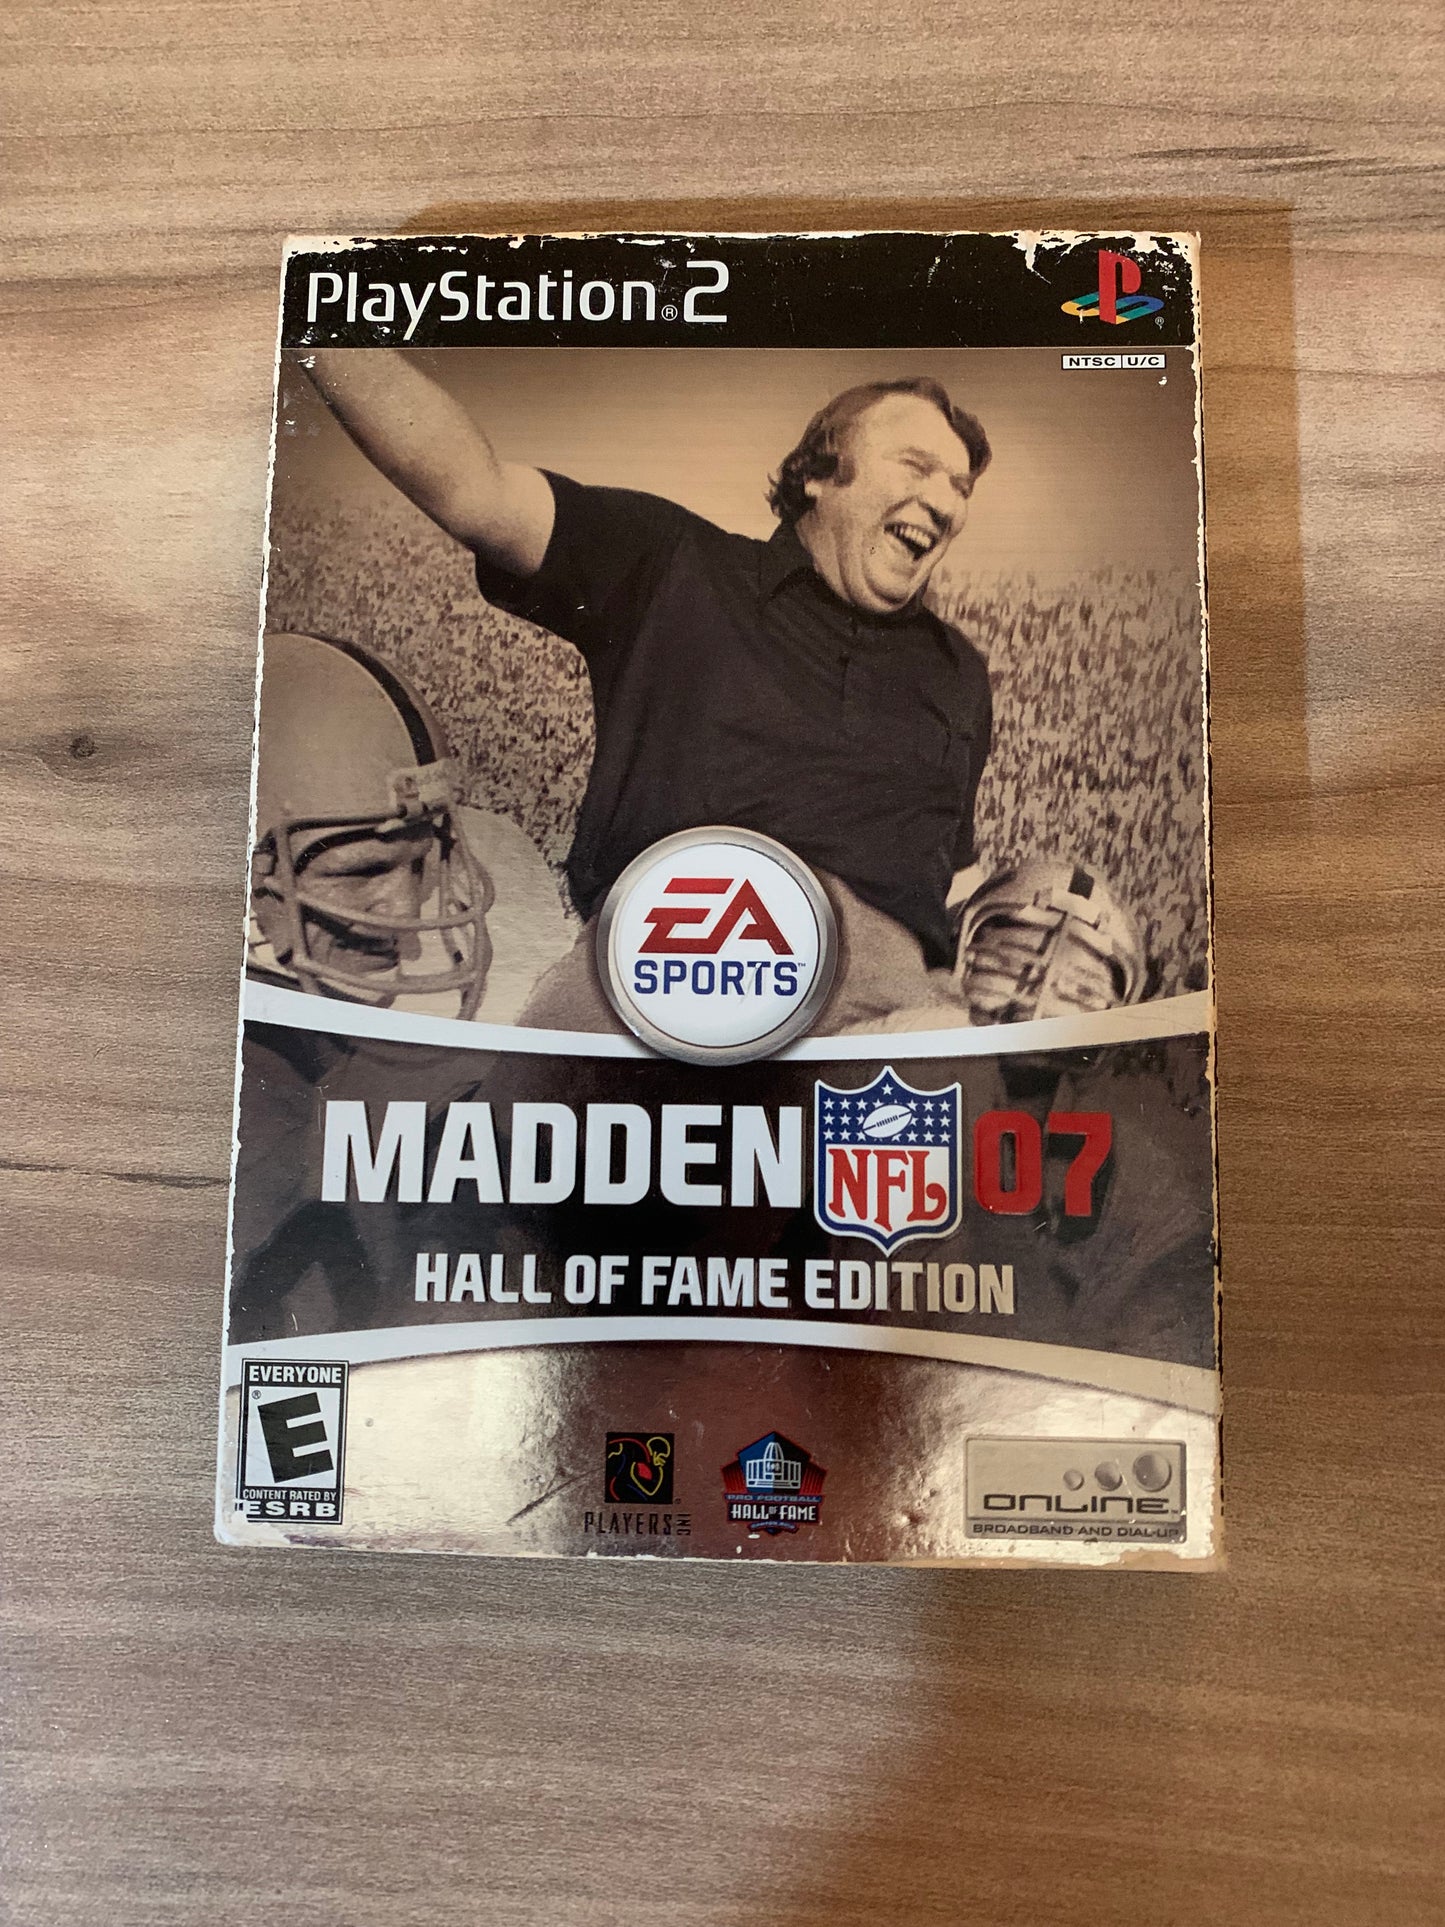 SONY PLAYSTATiON 2 [PS2] | MADDEN NFL 07 | HALL OF FAME EDiTiON